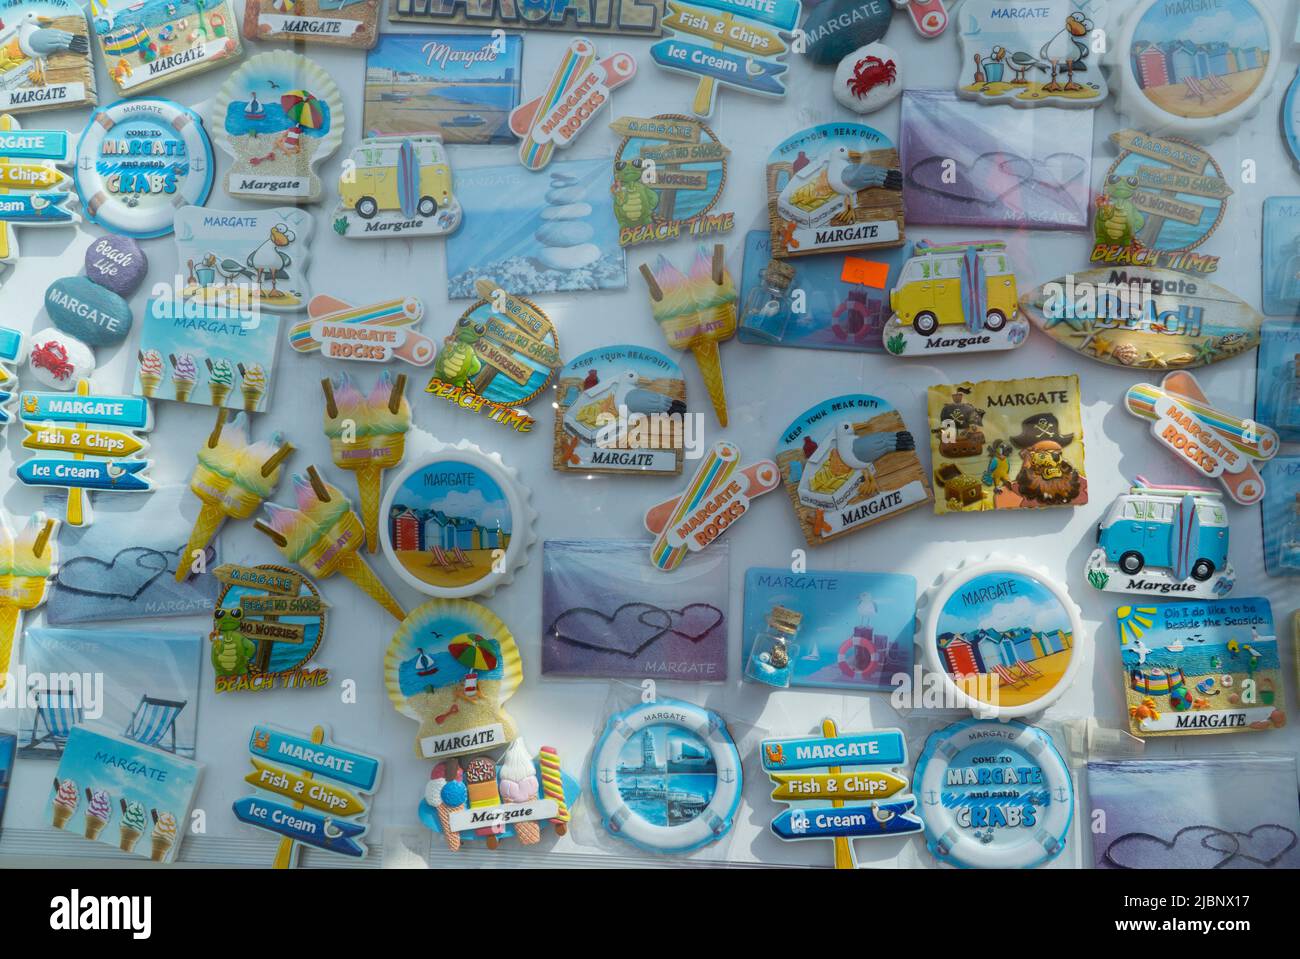 a display of souvenir fridge magnets in Margate, a seaside resort in Kent, southern England. Anna Watson/Alamy Stock Photo